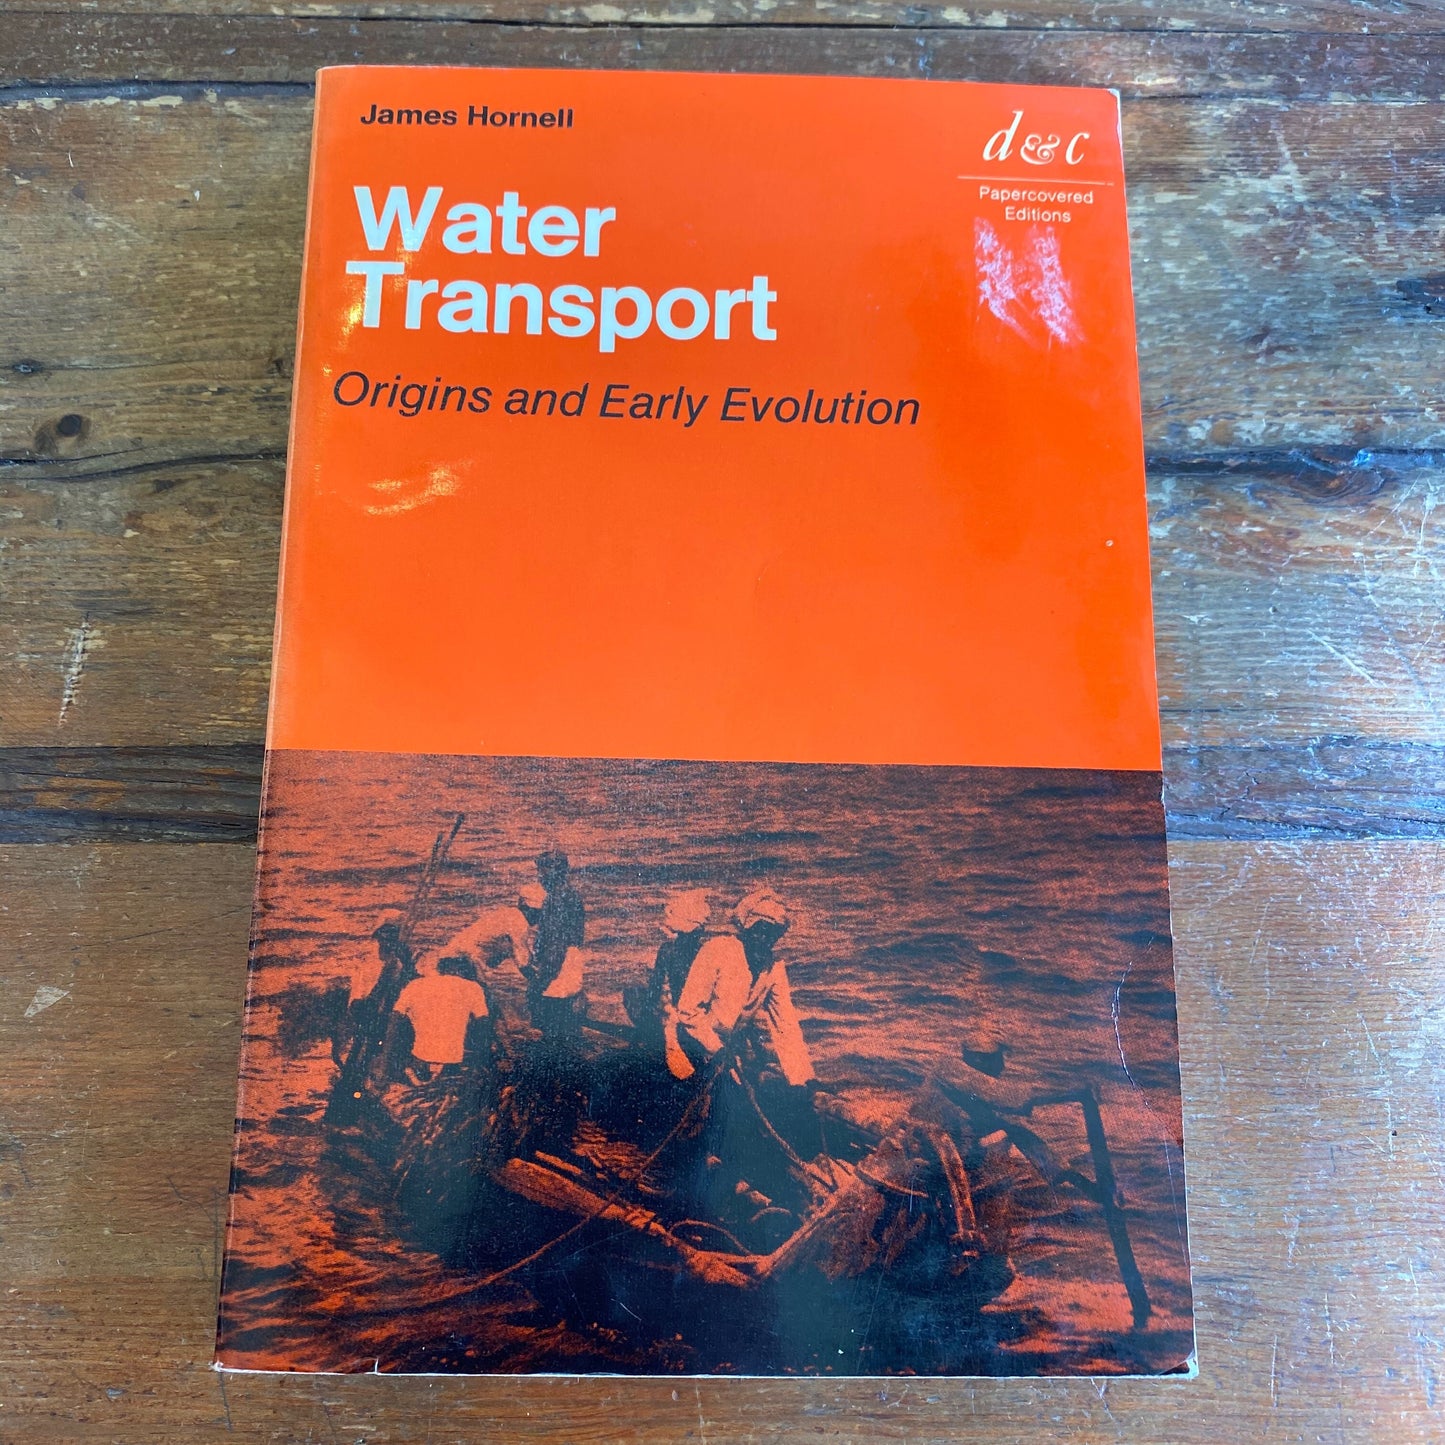 Book, "Water Transport Origins and Early Evolution"